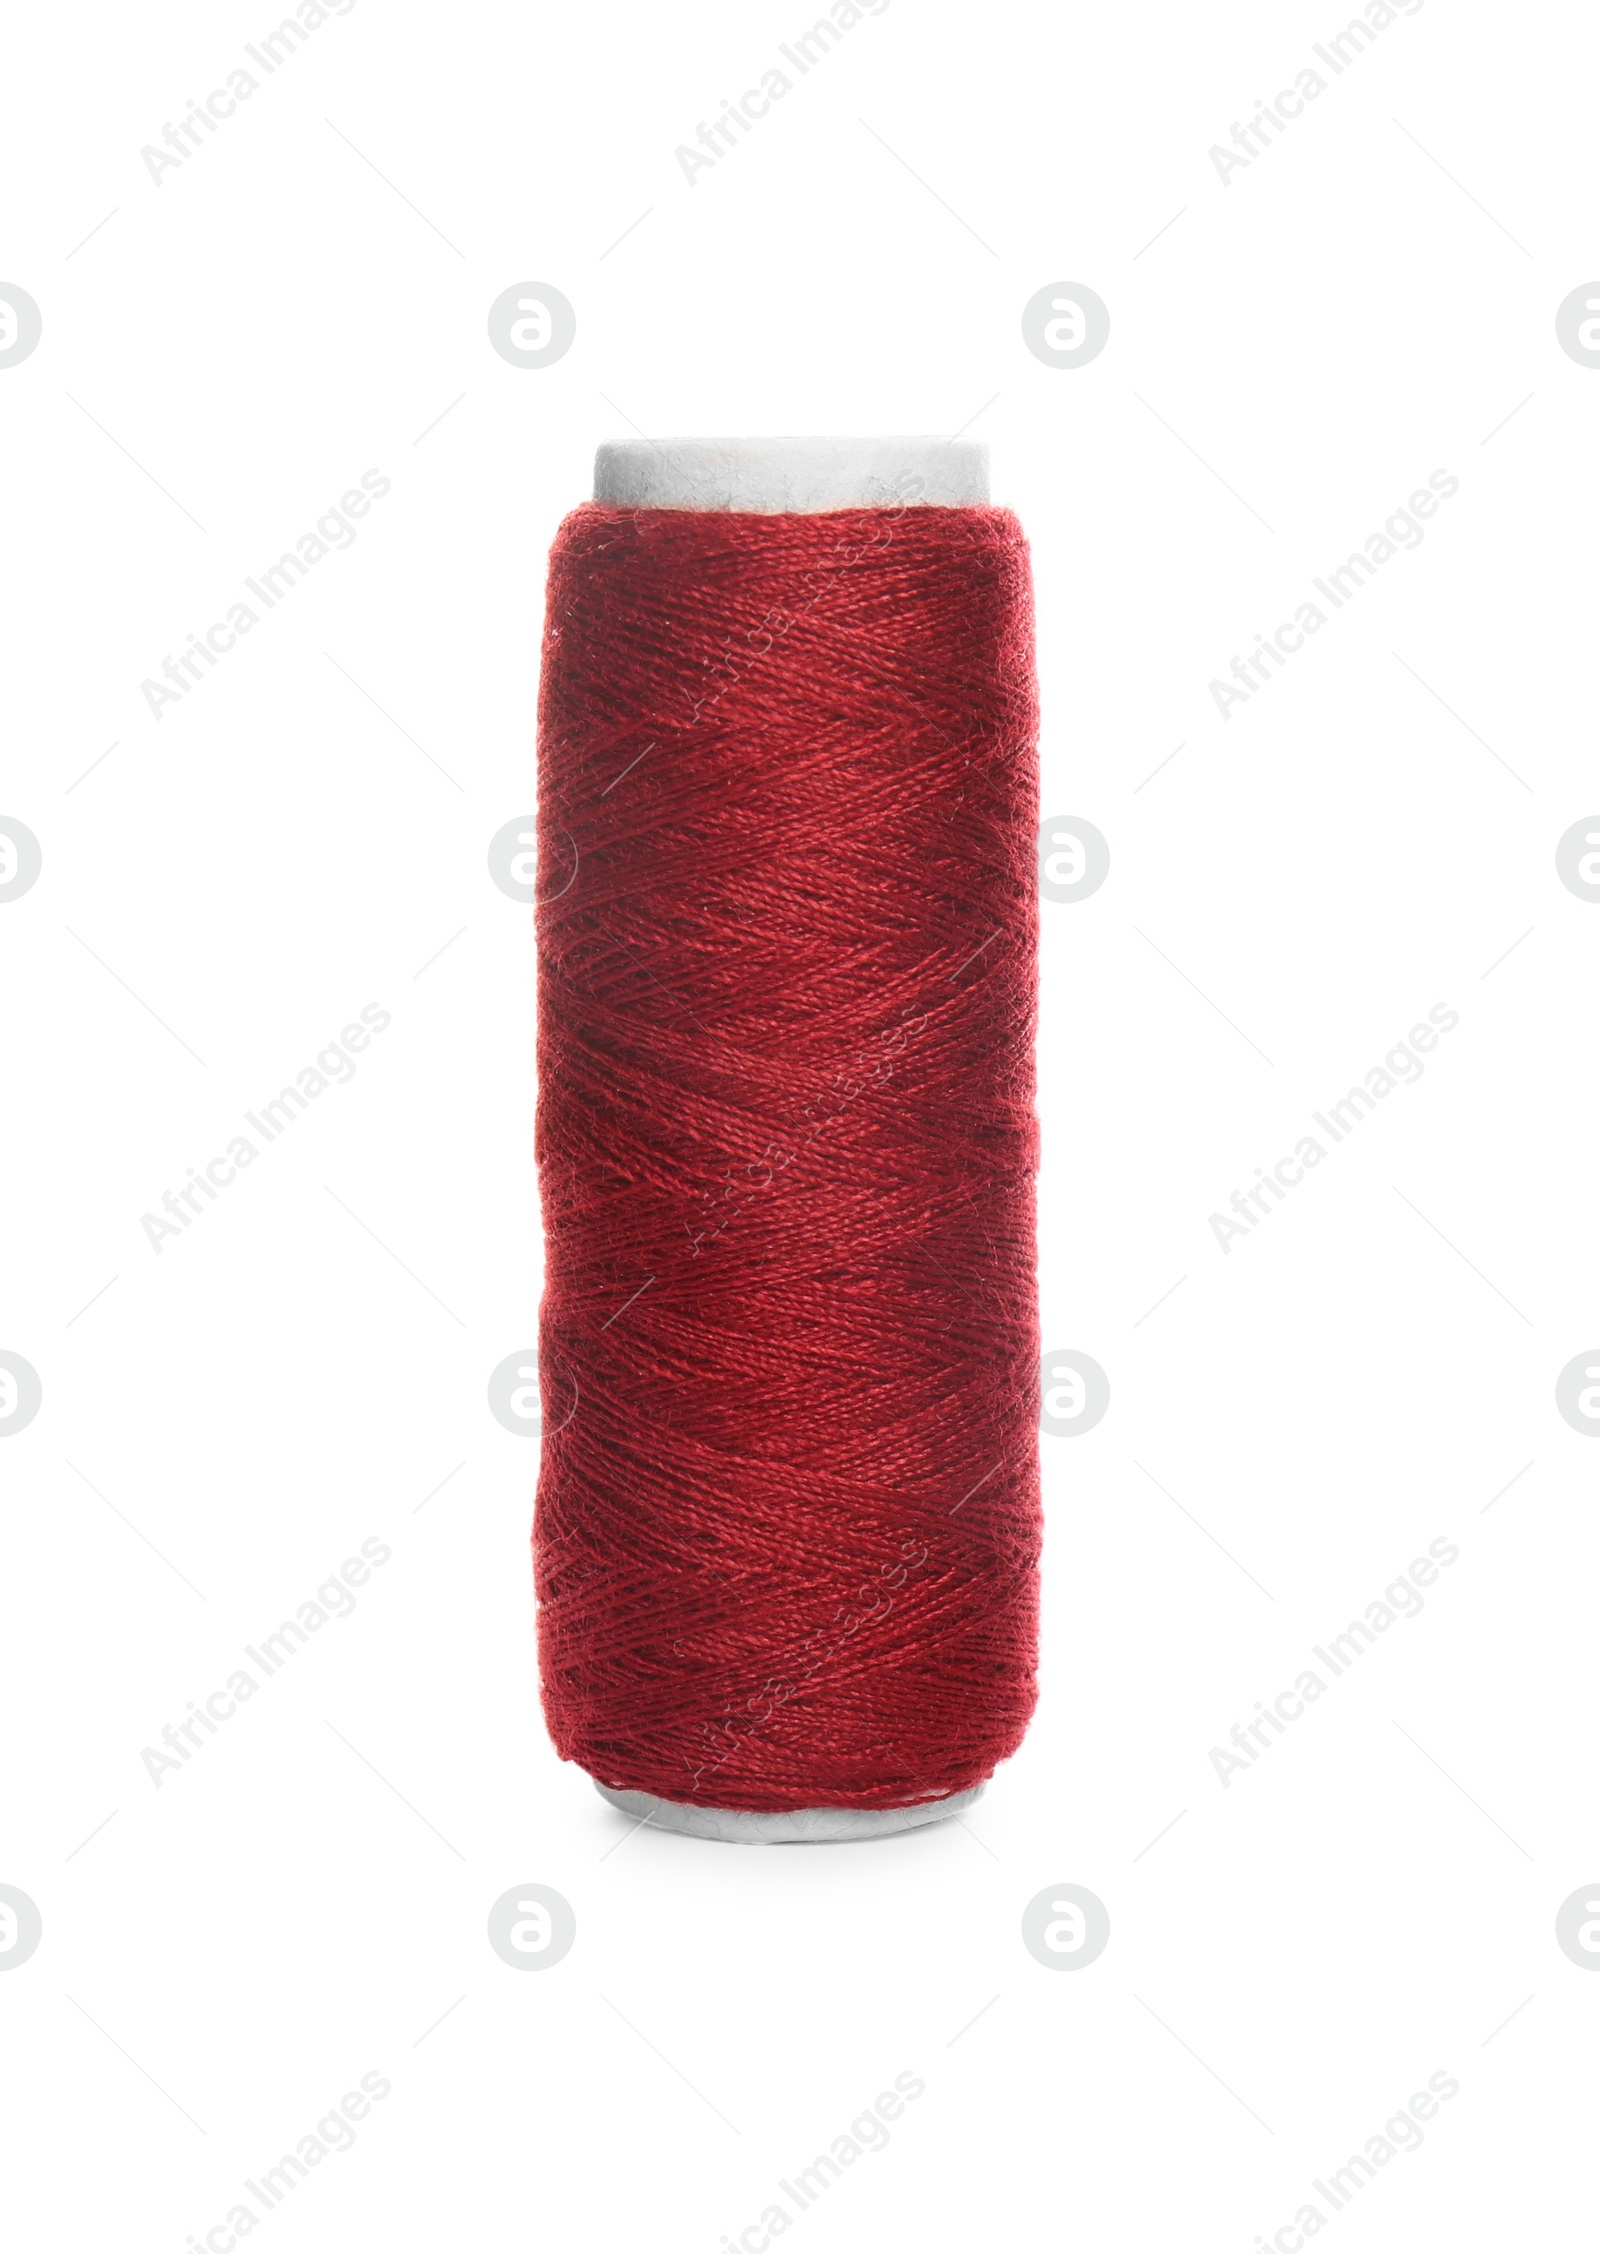 Photo of Spool of dark red sewing thread isolated on white